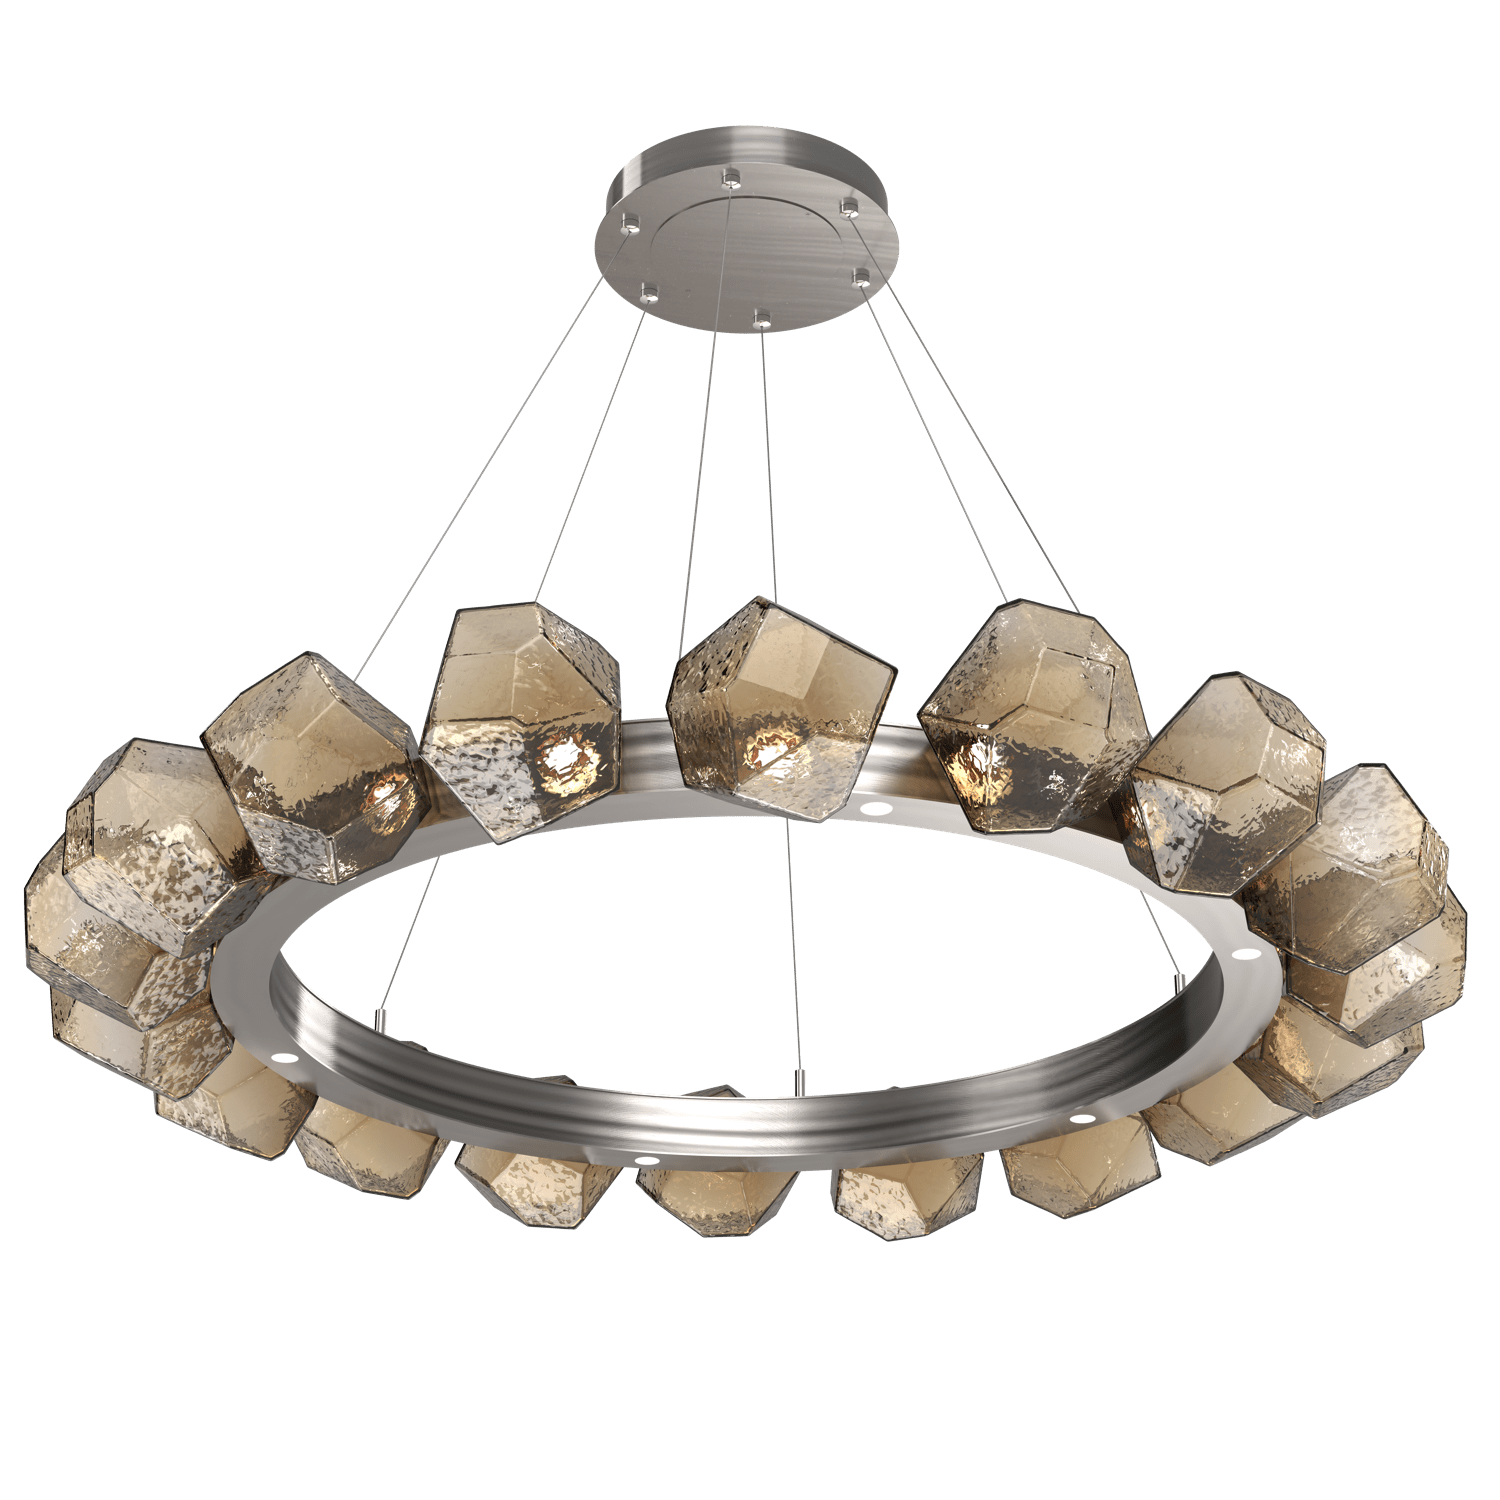 CHB0039-48-GM-B-Hammerton-Studio-Gem-48-inch-radial-ring-chandelier-with-gunmetal-finish-and-bronze-blown-glass-shades-and-LED-lamping